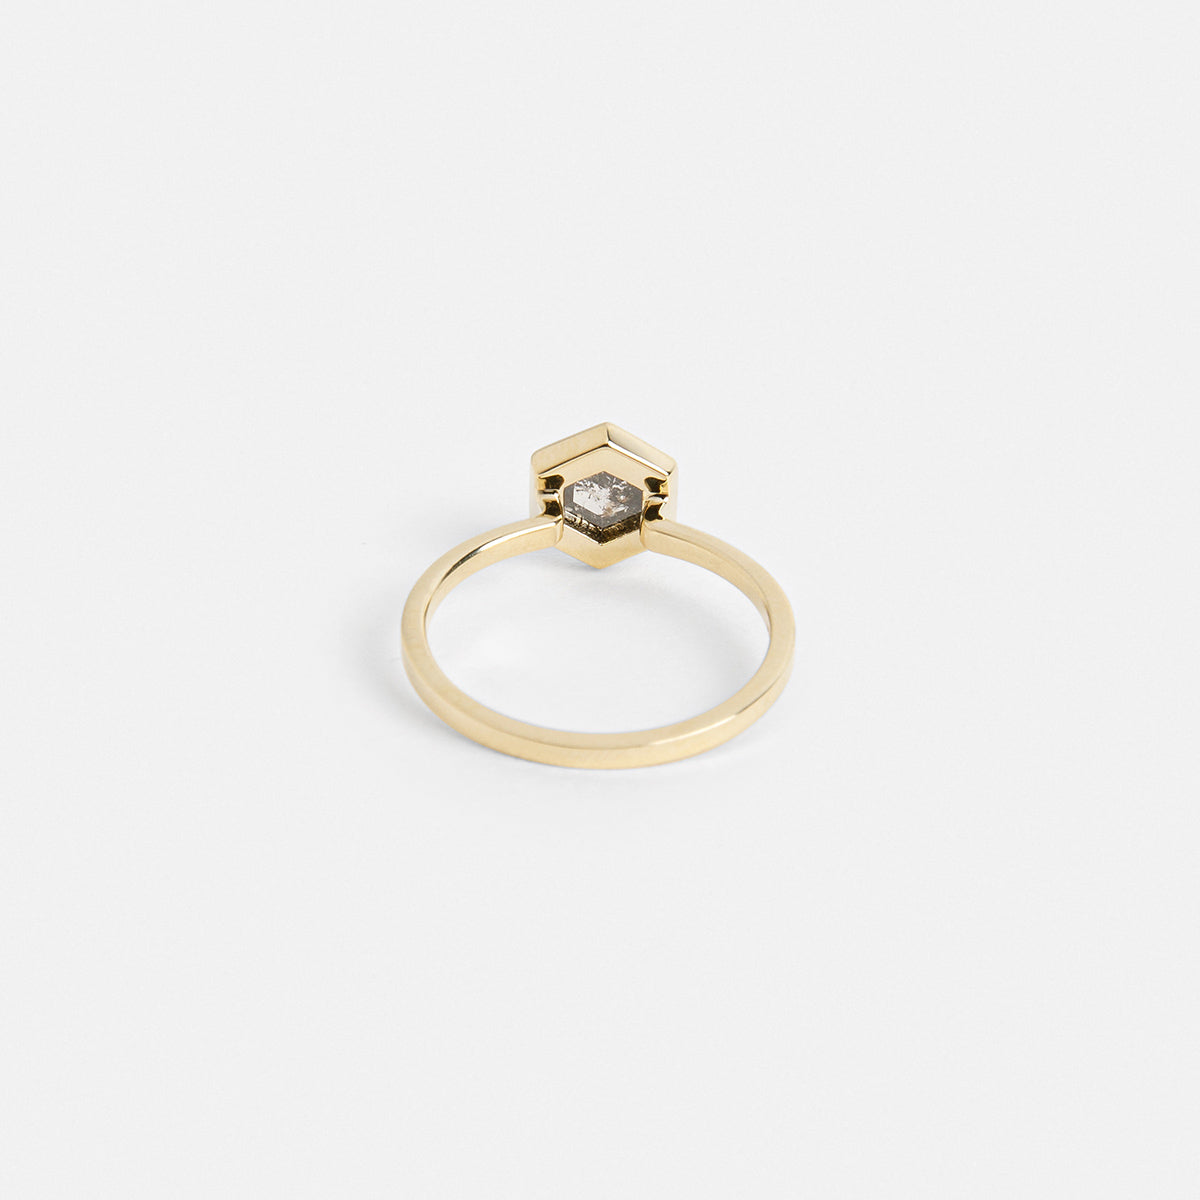 Luca Handmade Ring in 14k Gold set with a 0.99ct salt and pepper hexagon diamond By SHW Fine Jewelry NYC